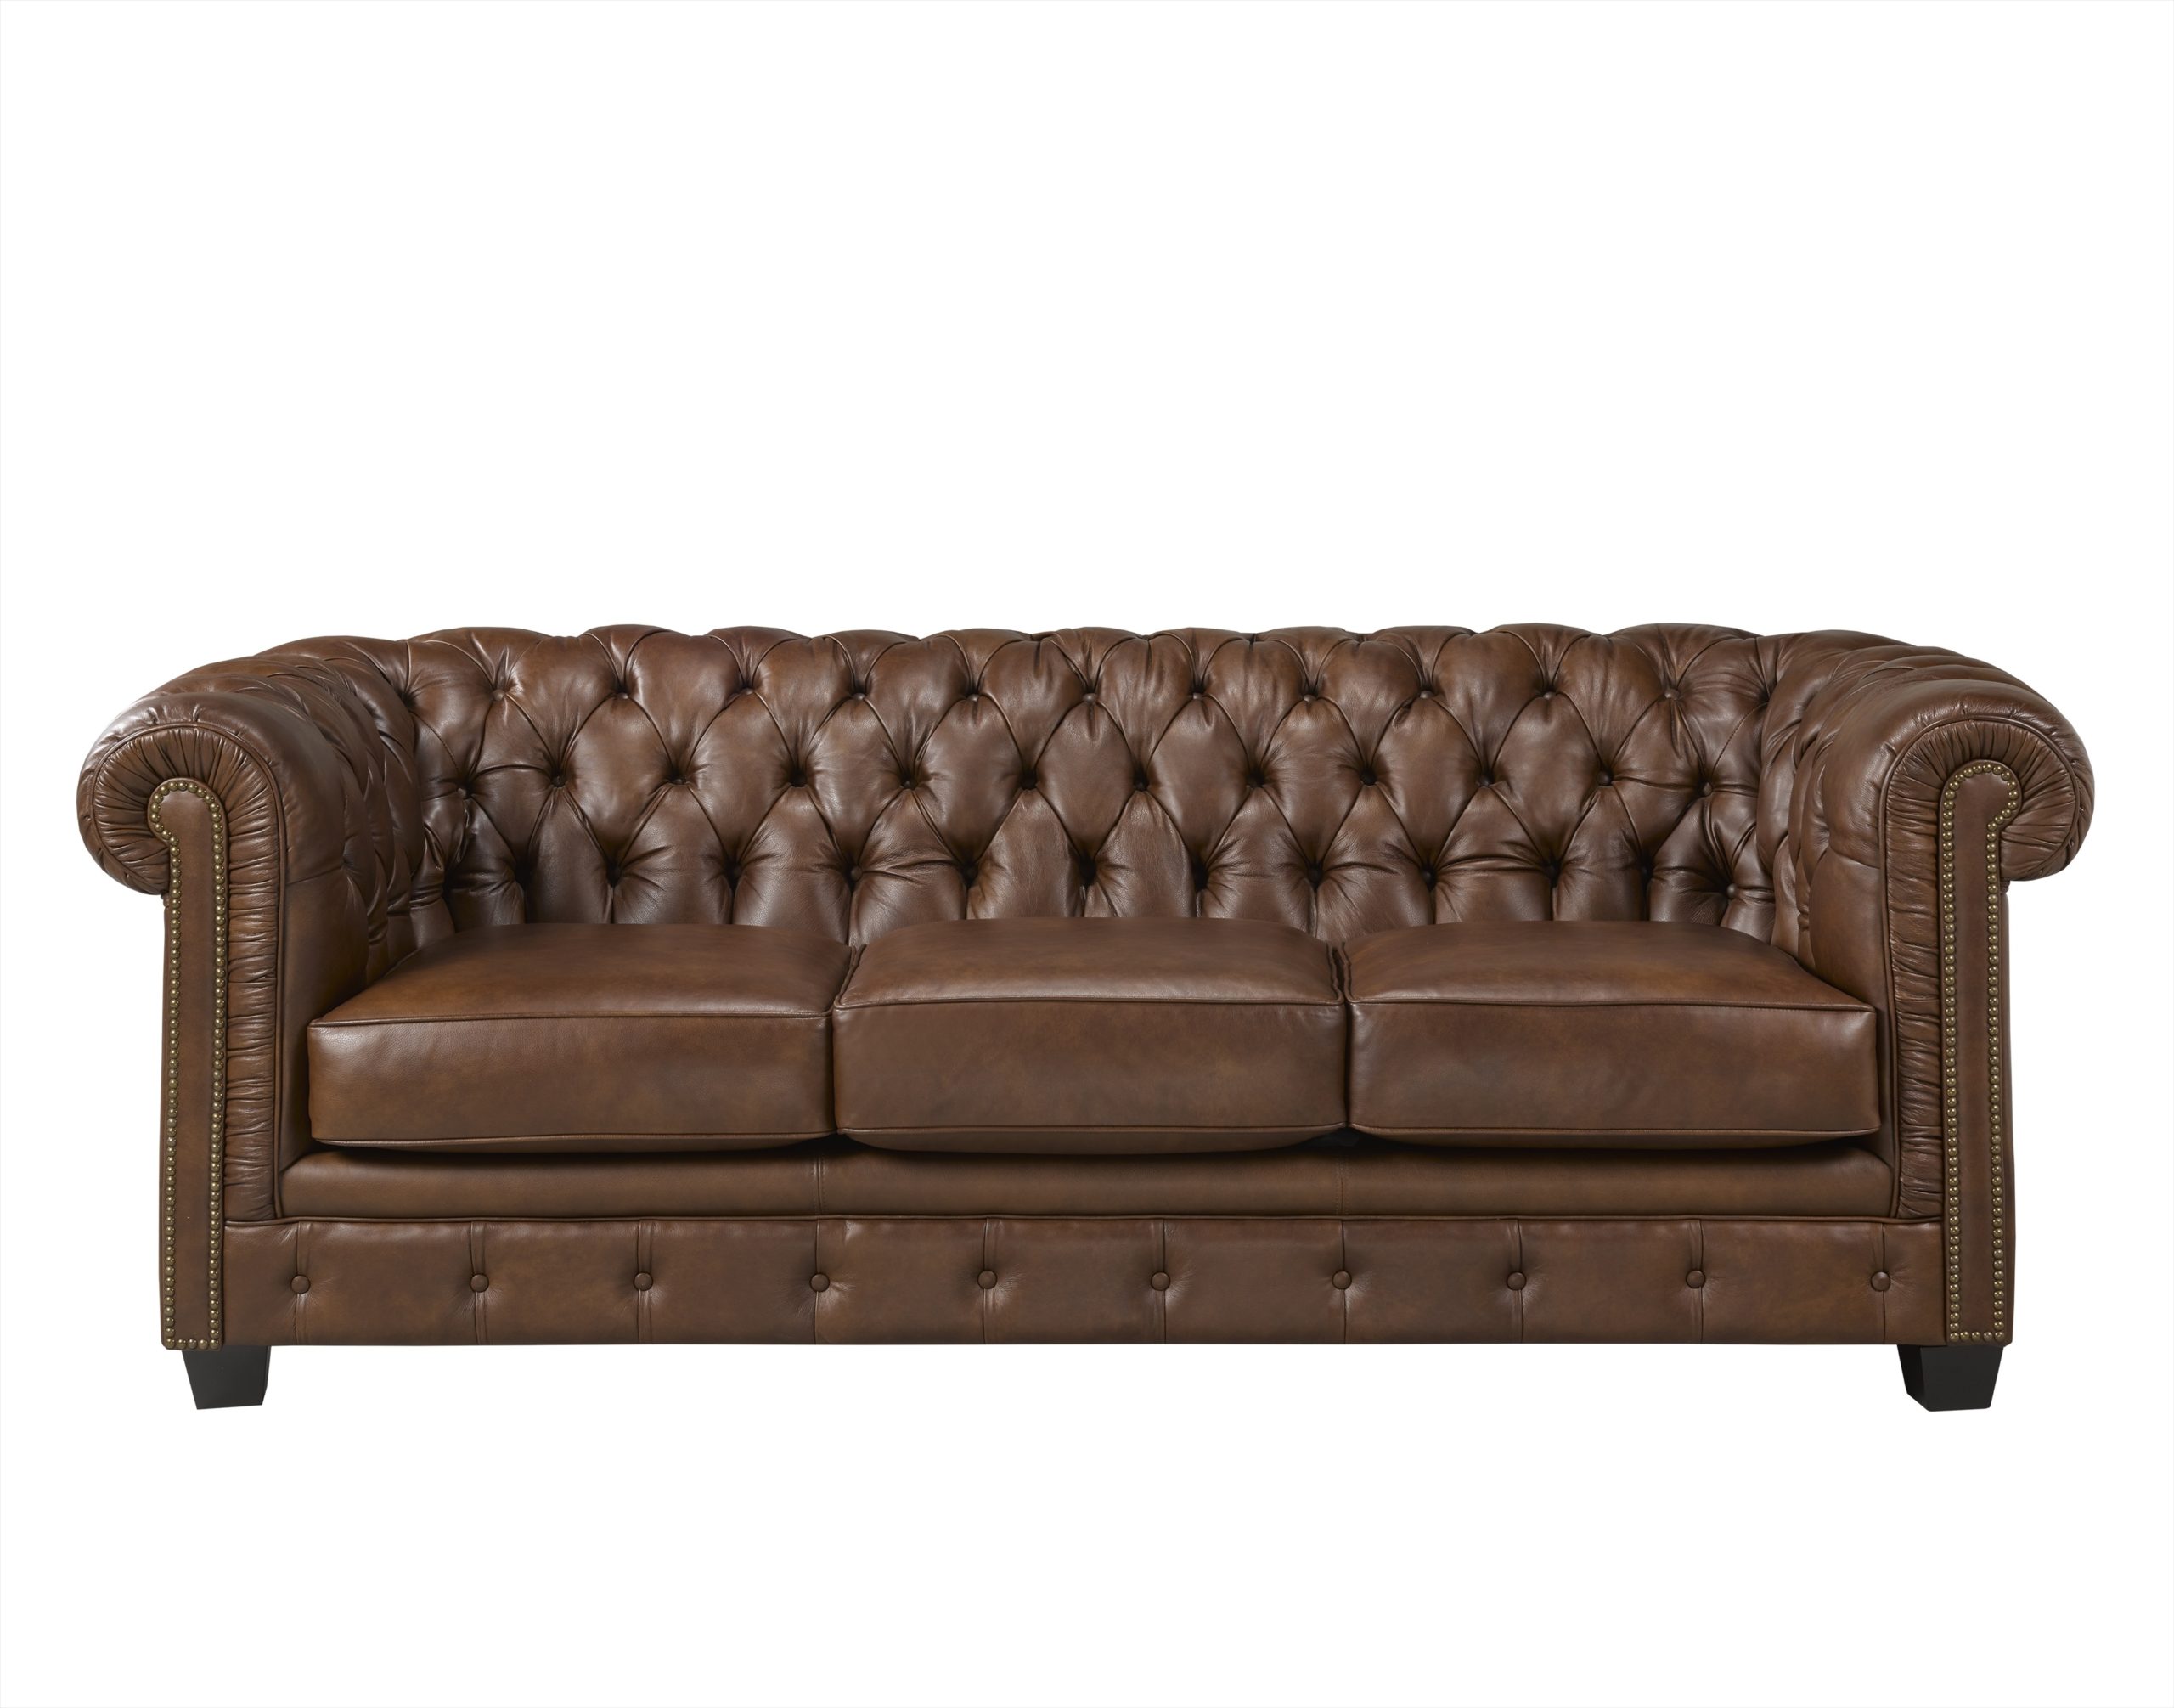 Traditional Tufted Brown Leather Living, Traditional Leather Furniture